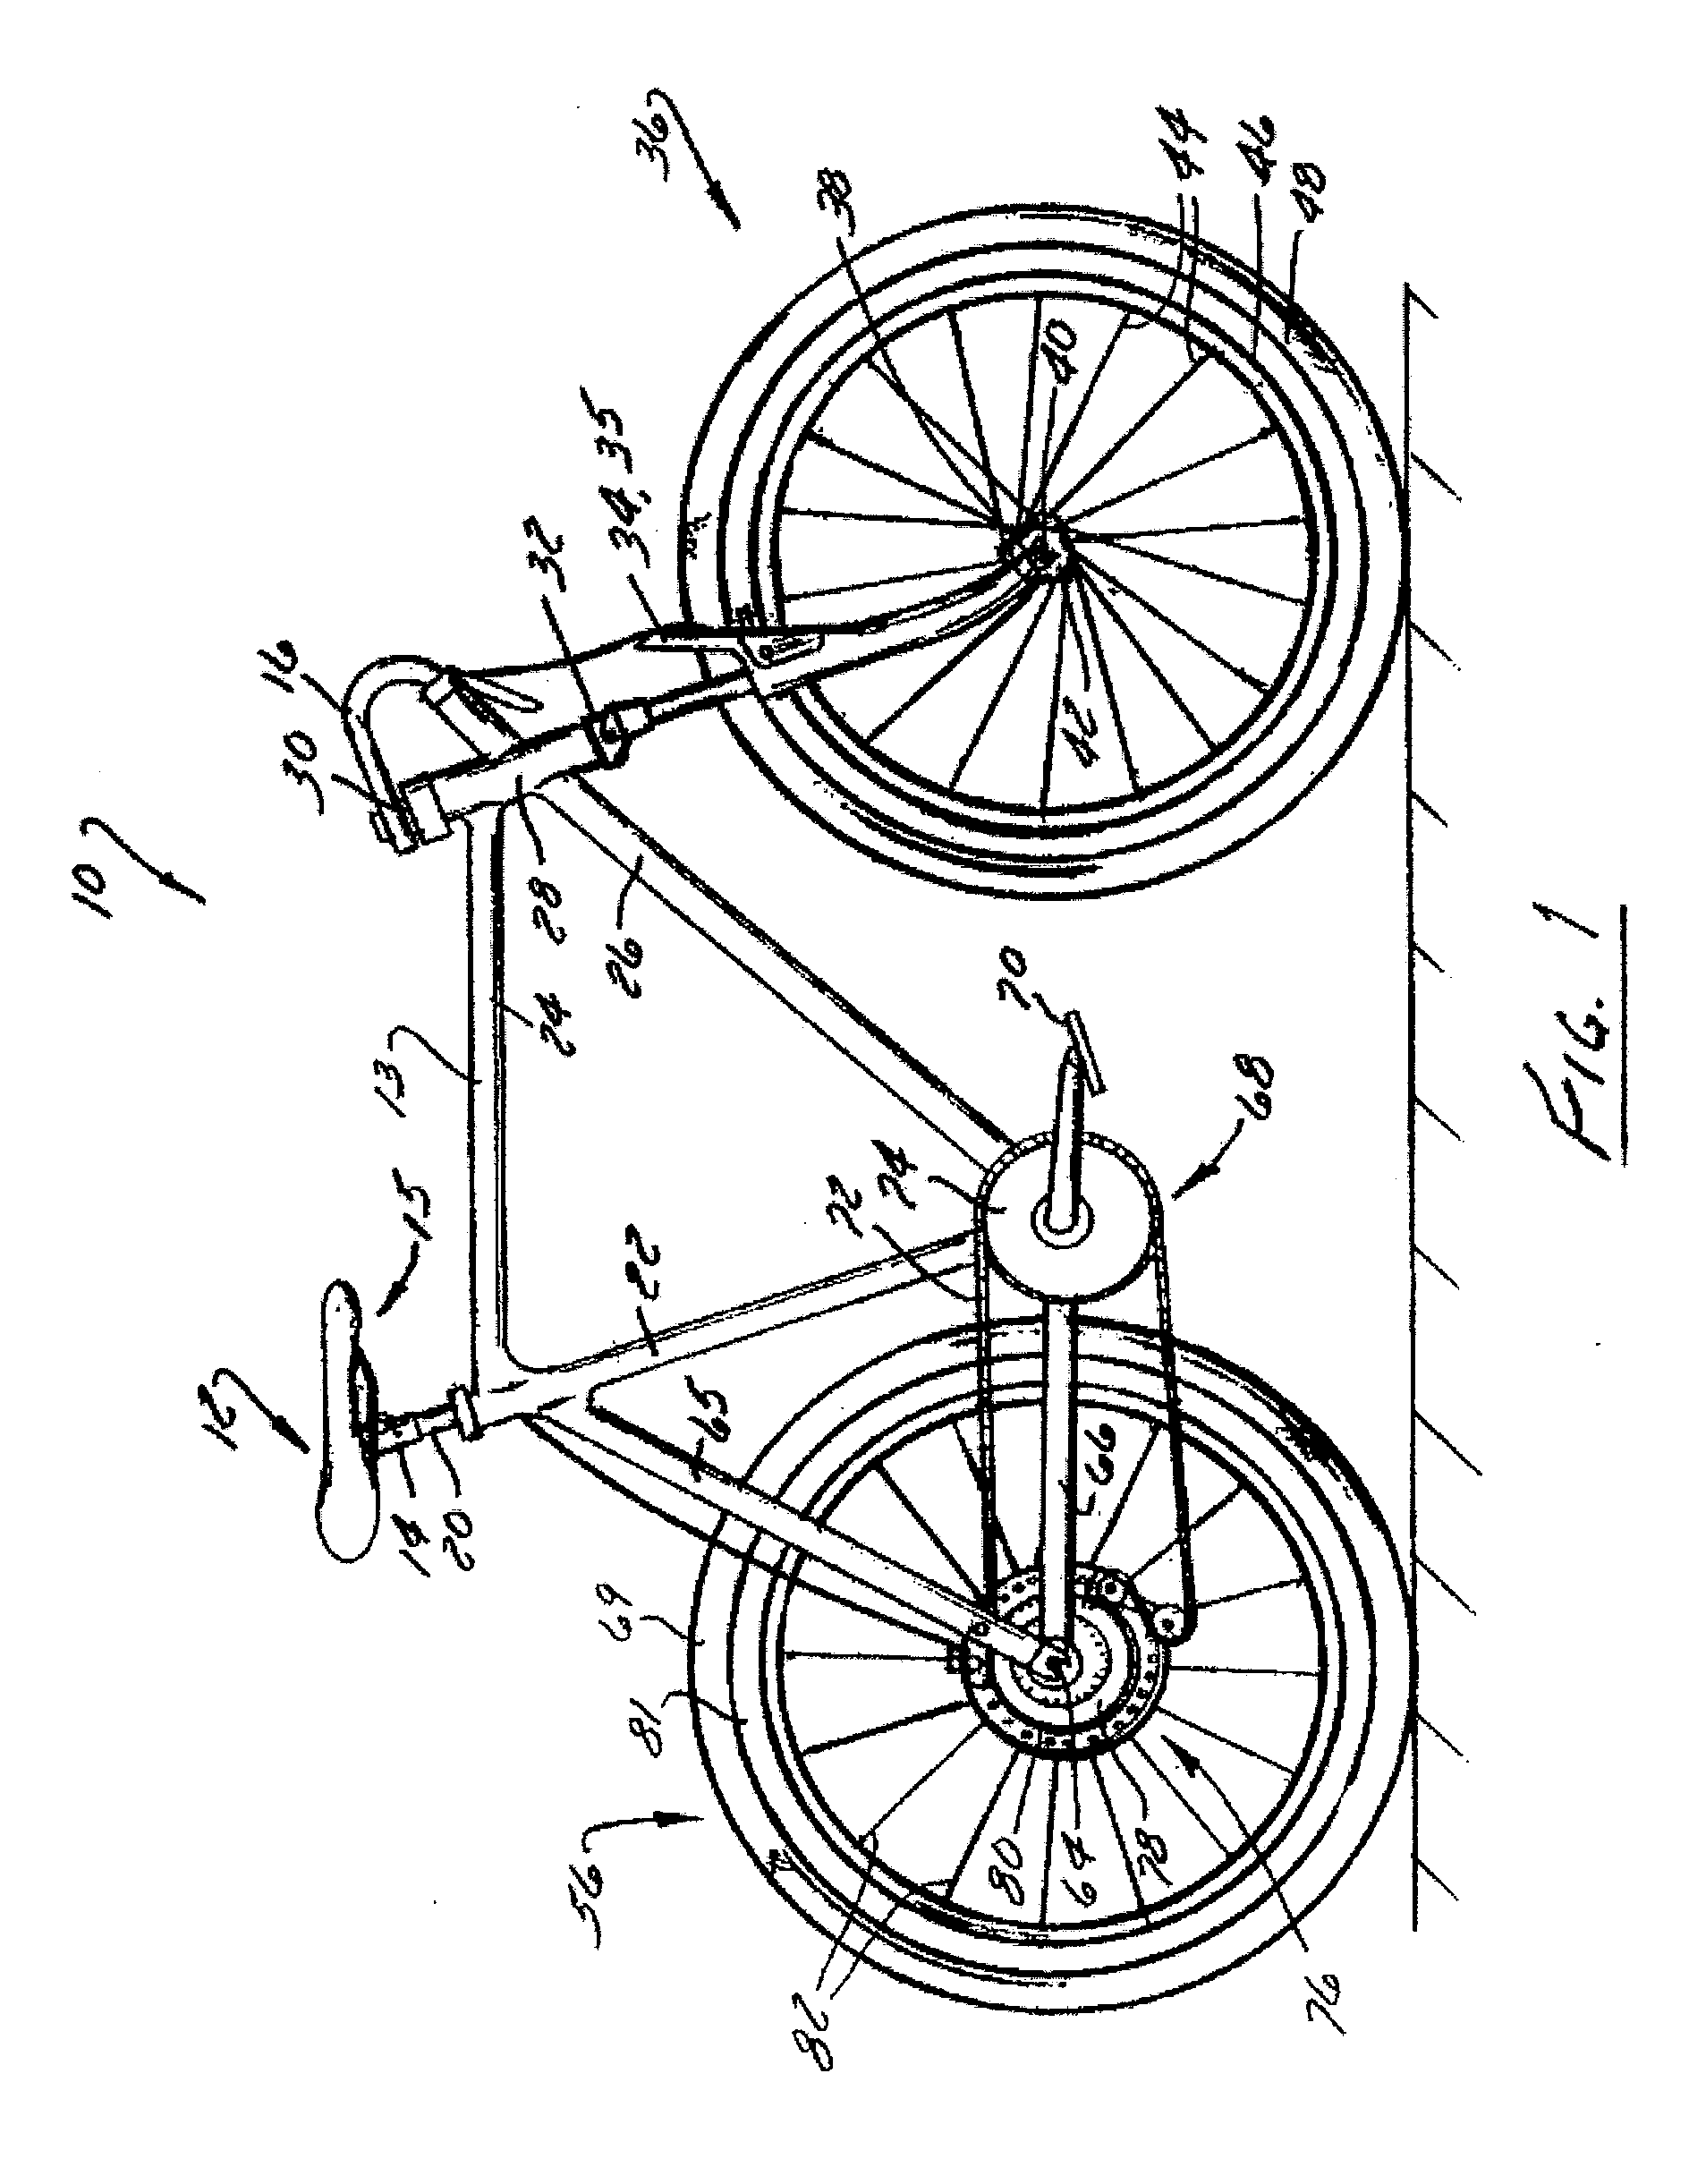 Bicycle seat system